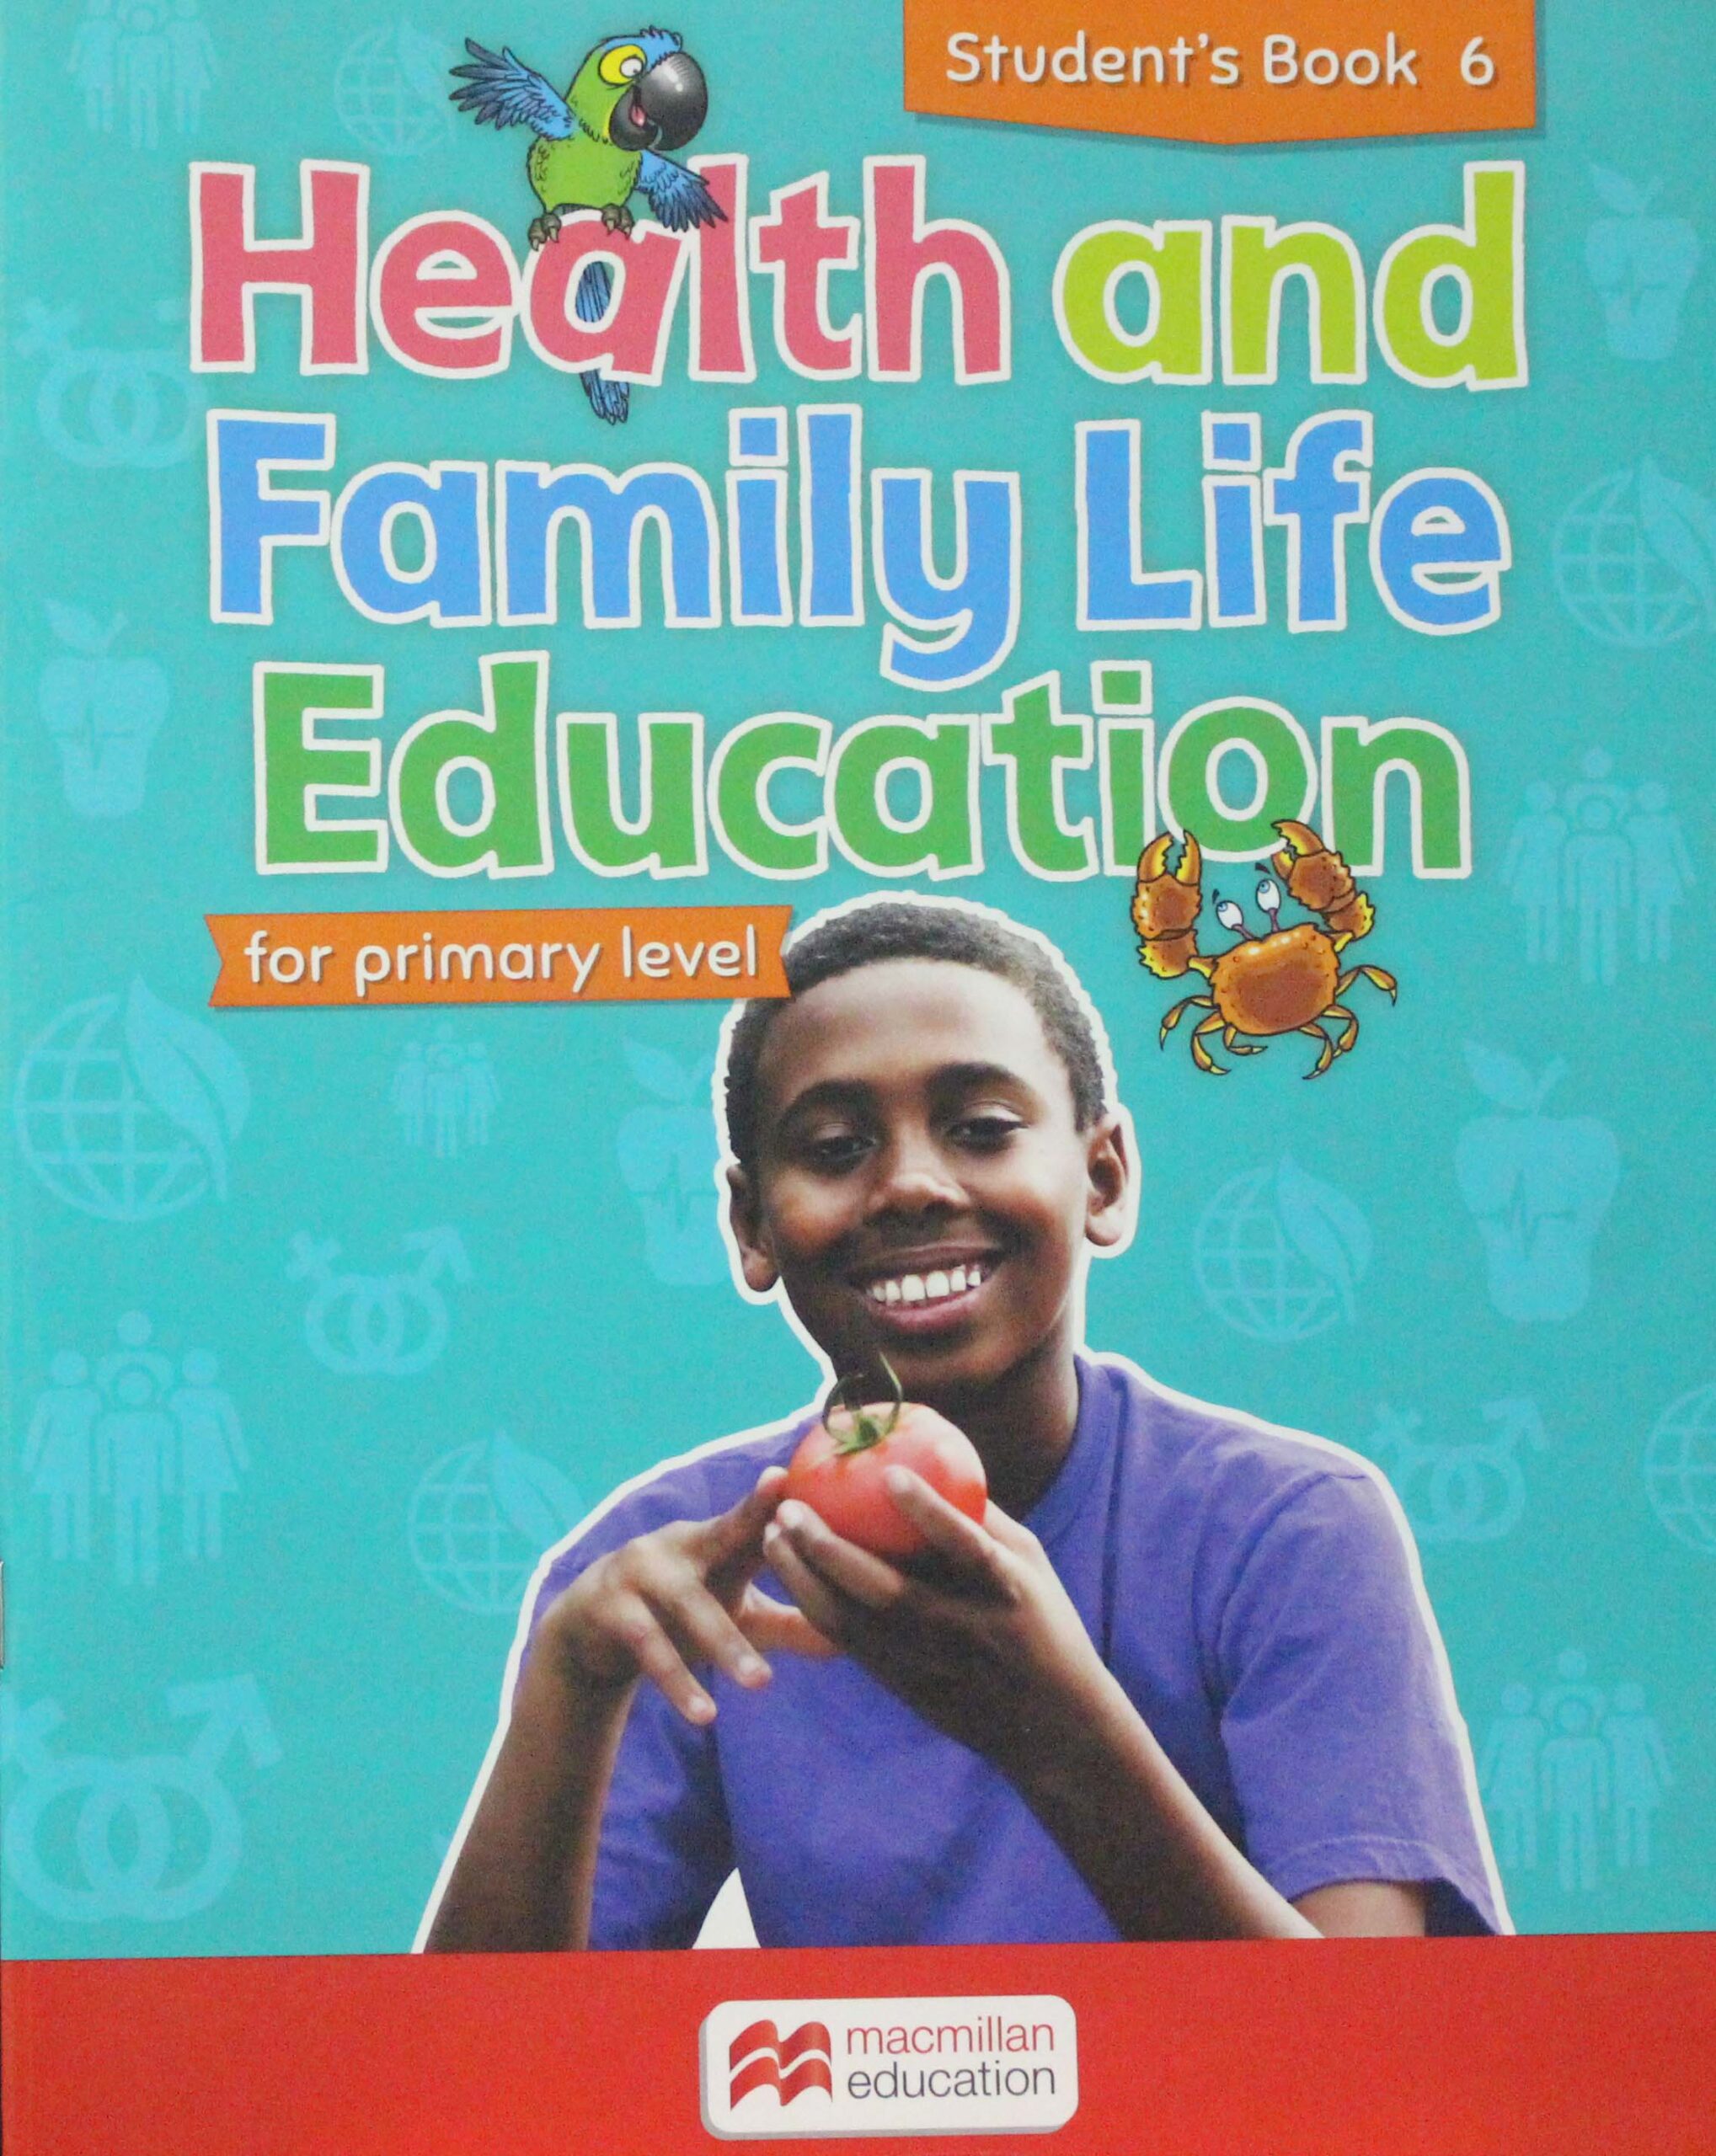 TCCU　primary　Health　and　For　Book　level:　Education　and　Outlet　Family　Life　Student　Bookstore